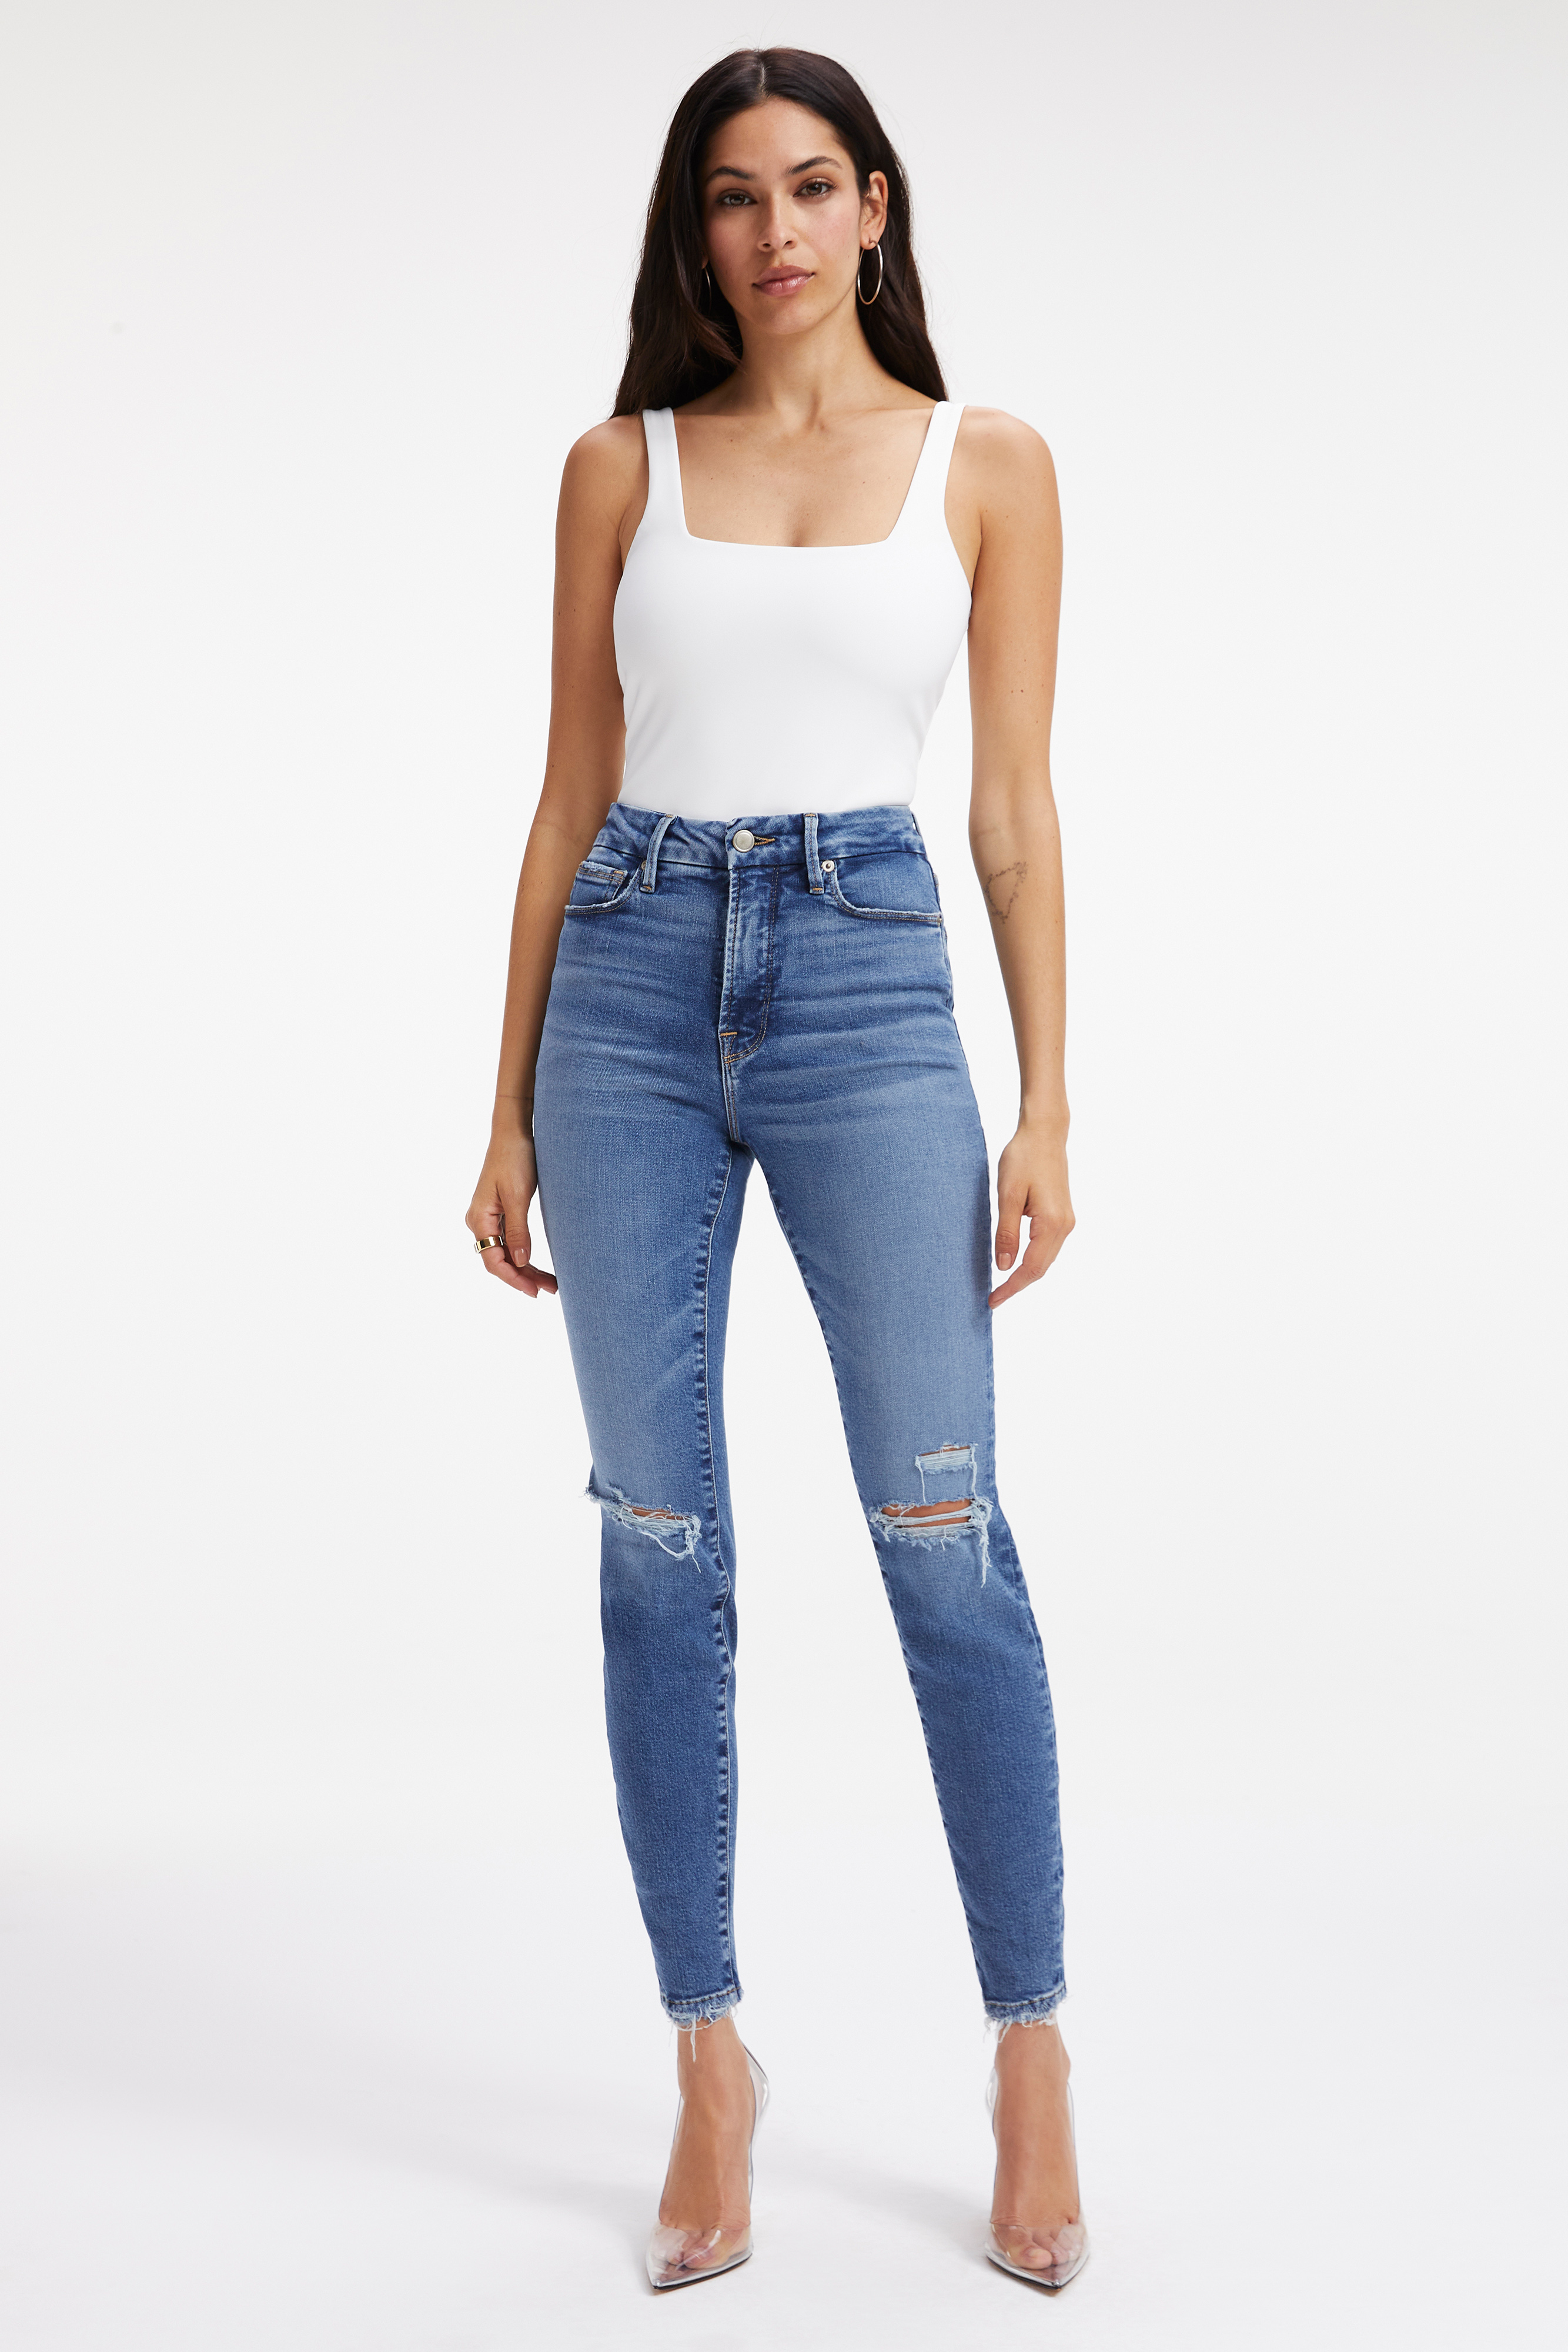 Styled with GOOD WAIST CROPPED JEANS | INDIGO223